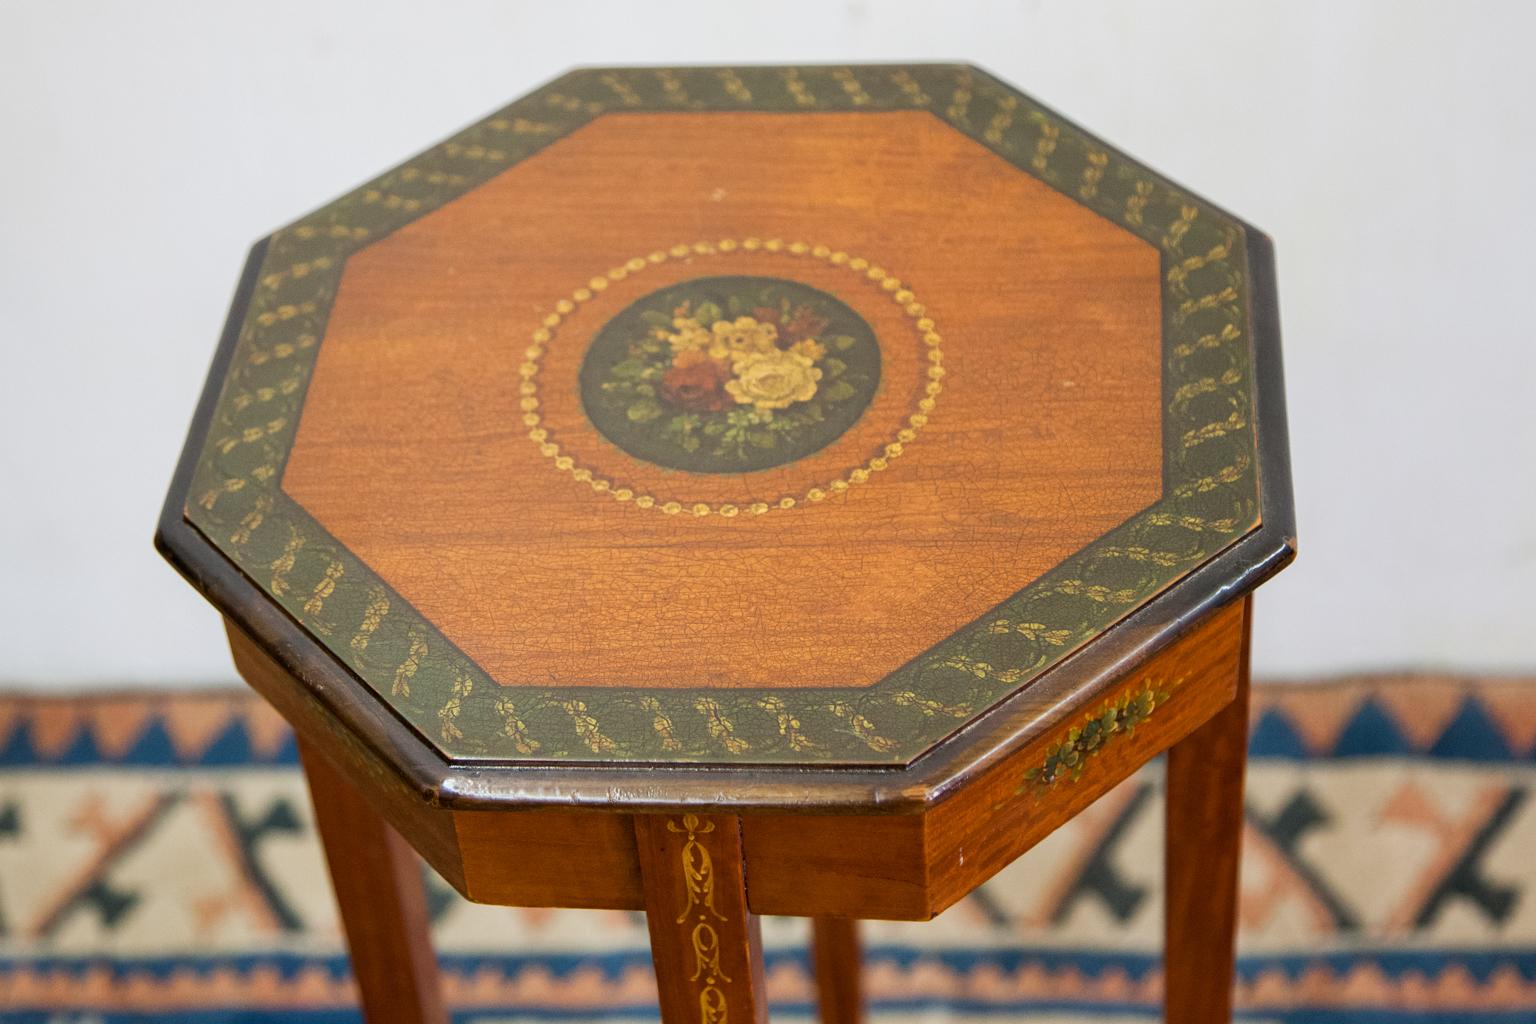 Hand painted satinwood stand, the octagonal top edge painted with an interlaced floral trailing vine. The center of the top has a floral center surrounded by a beadwork border. Tapered legs have painted bellflower with a nicely shaped floral painted